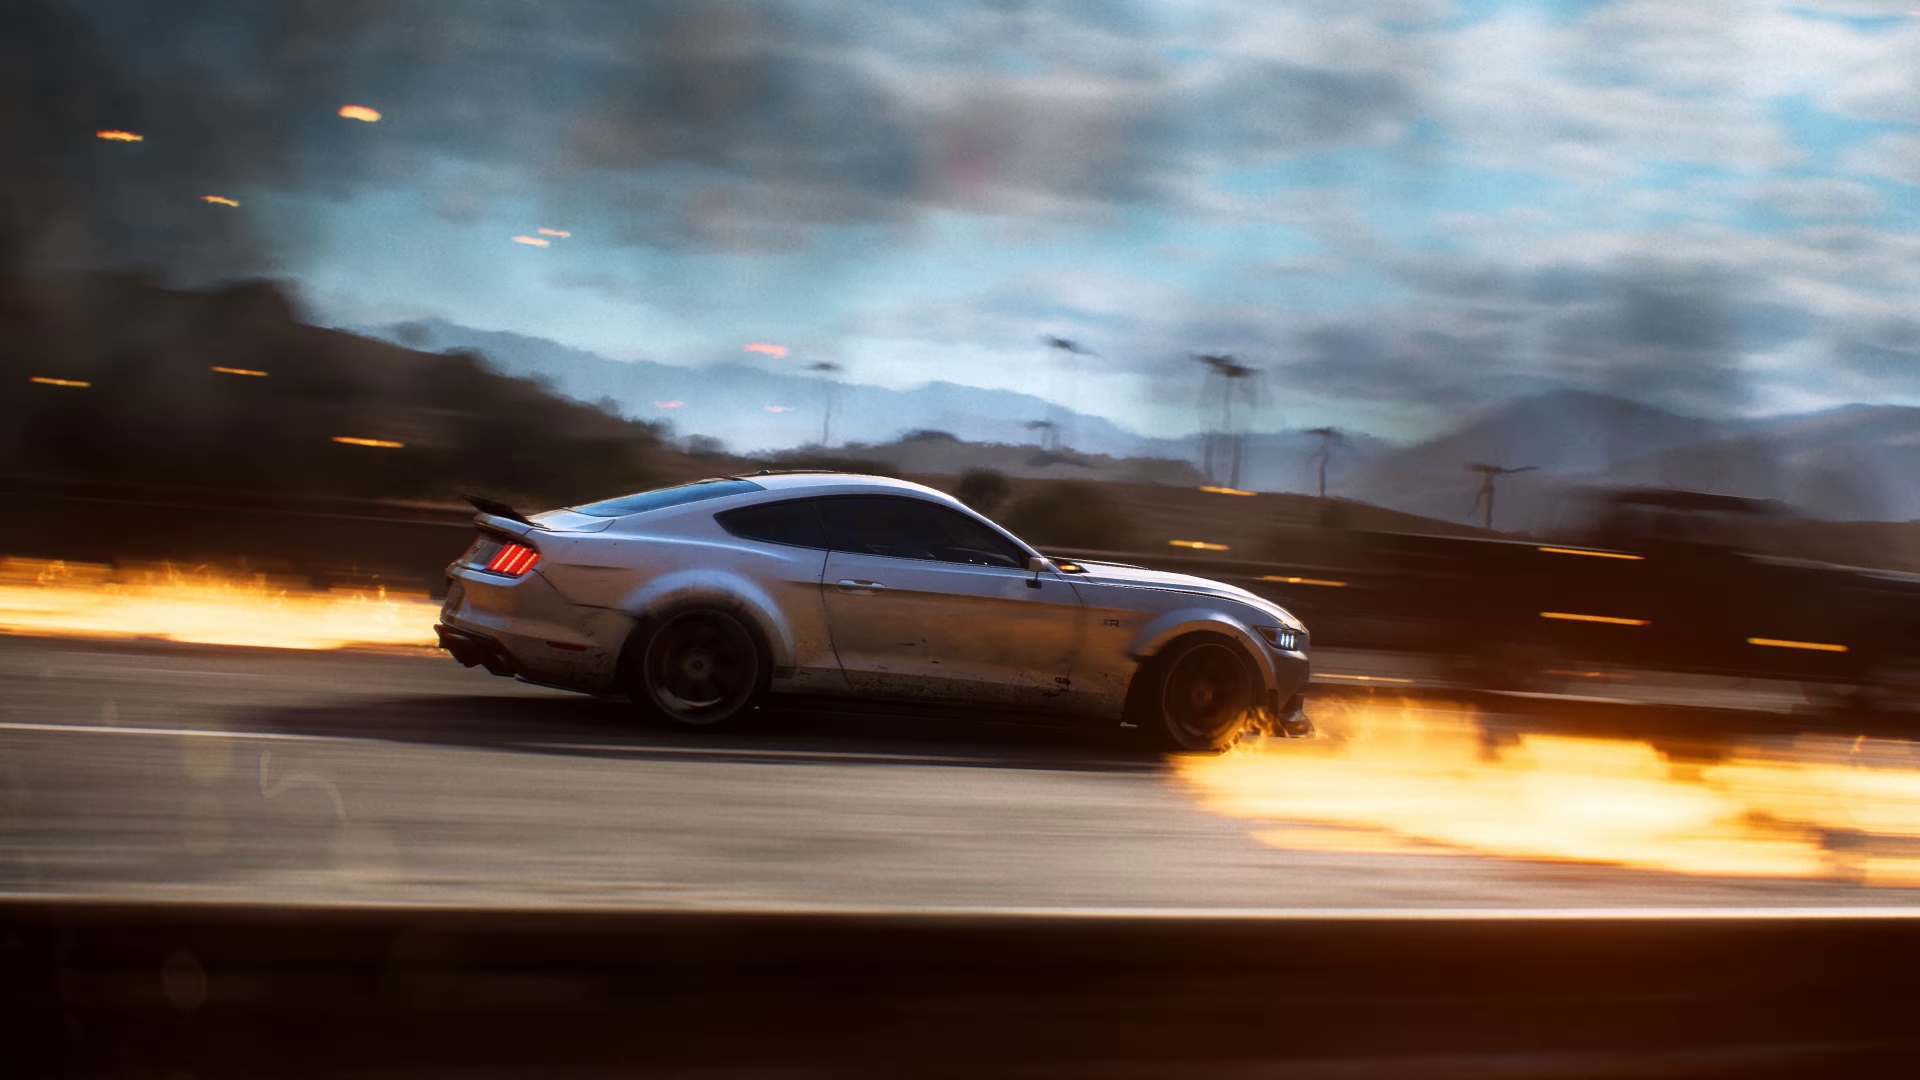 Ford Ford Mustang Gt Need For Speed Car 1920x1080